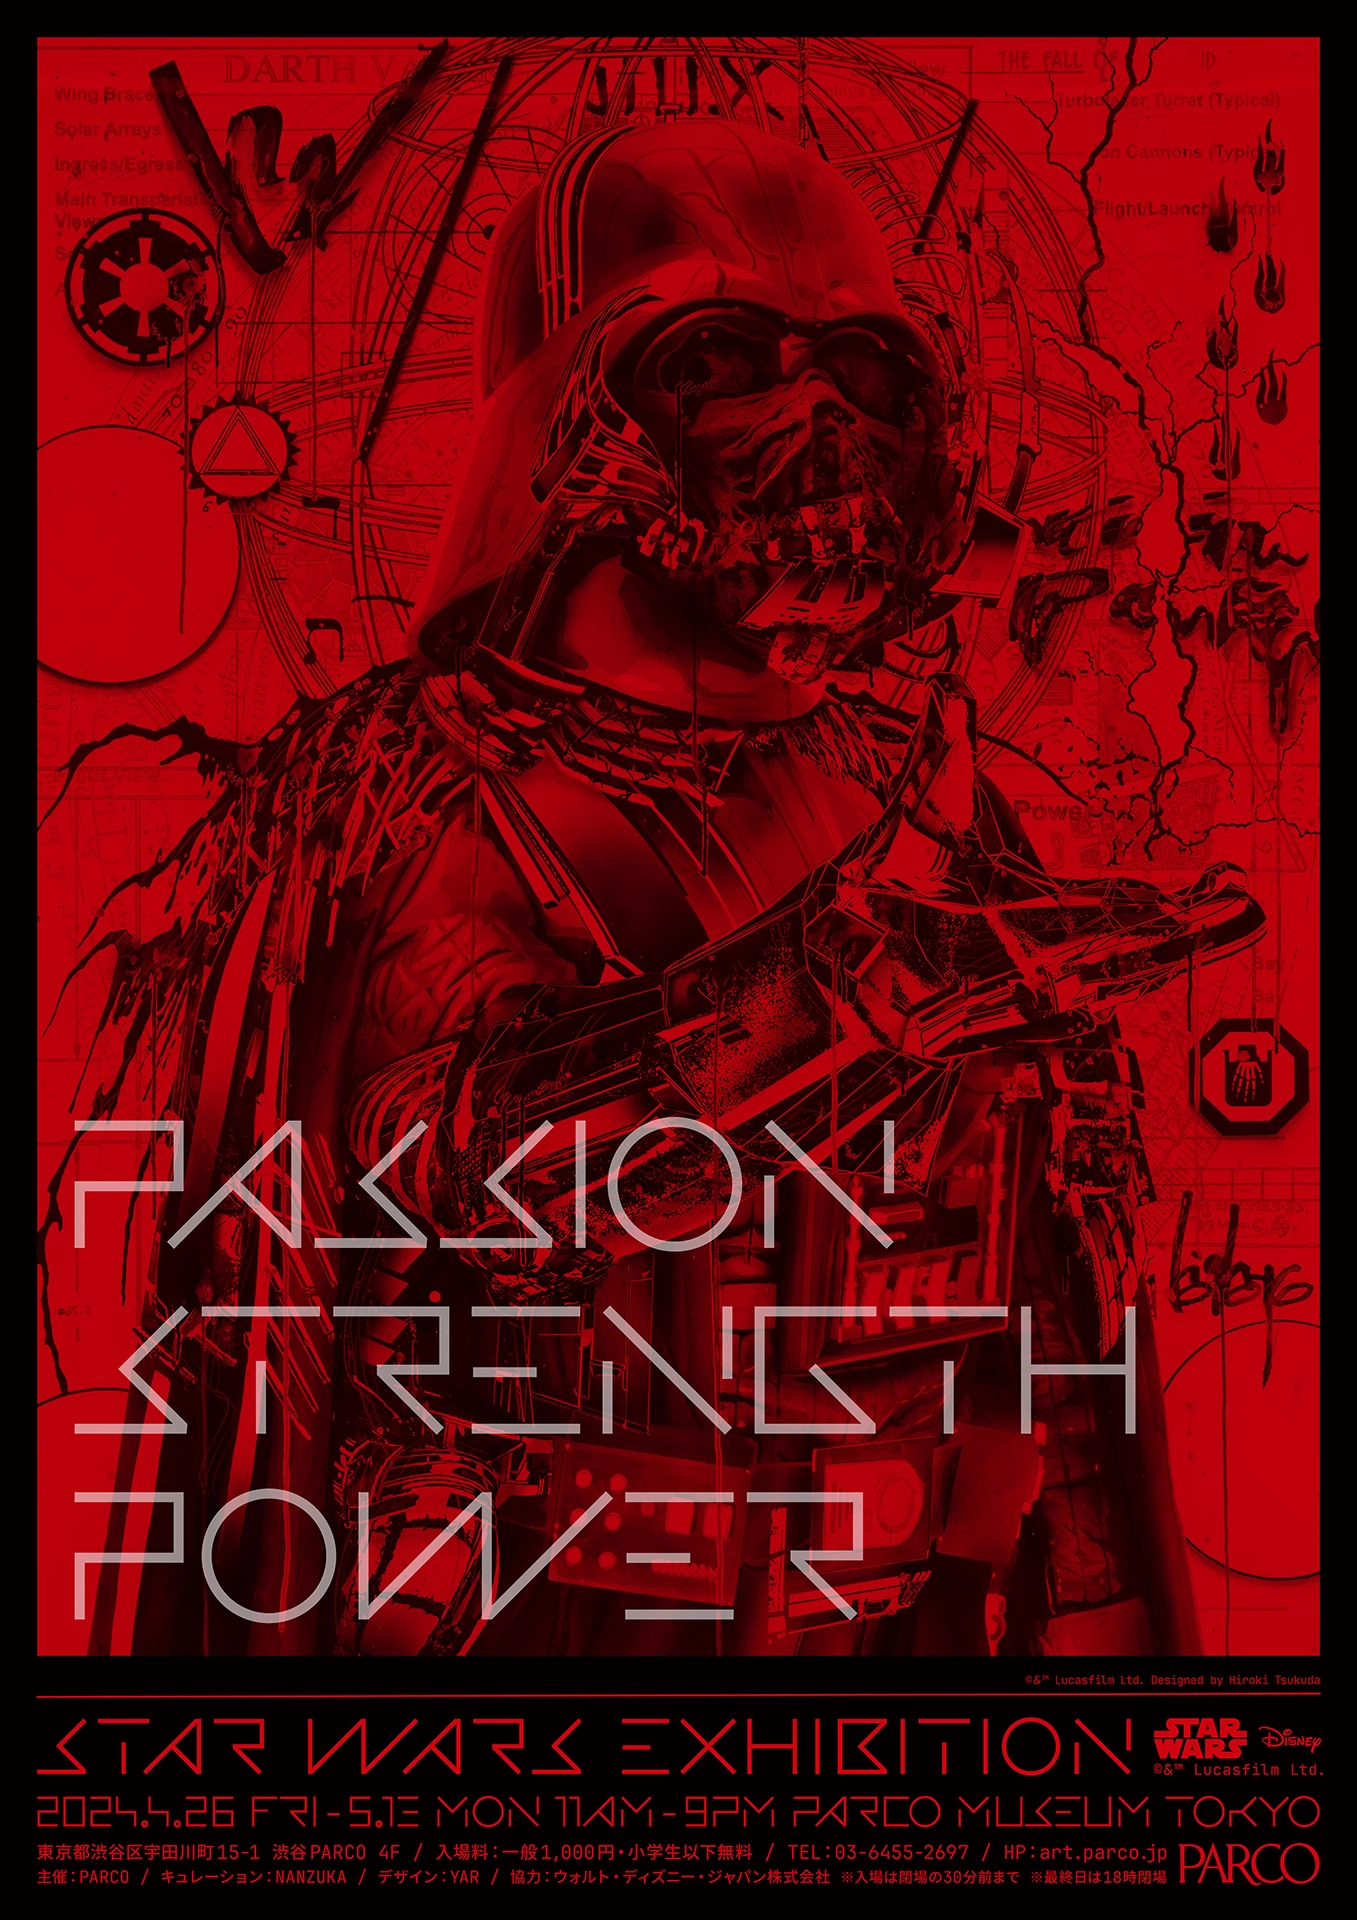 STAR WARS EXHIBITION ”PASSION STRENGTH POWER”